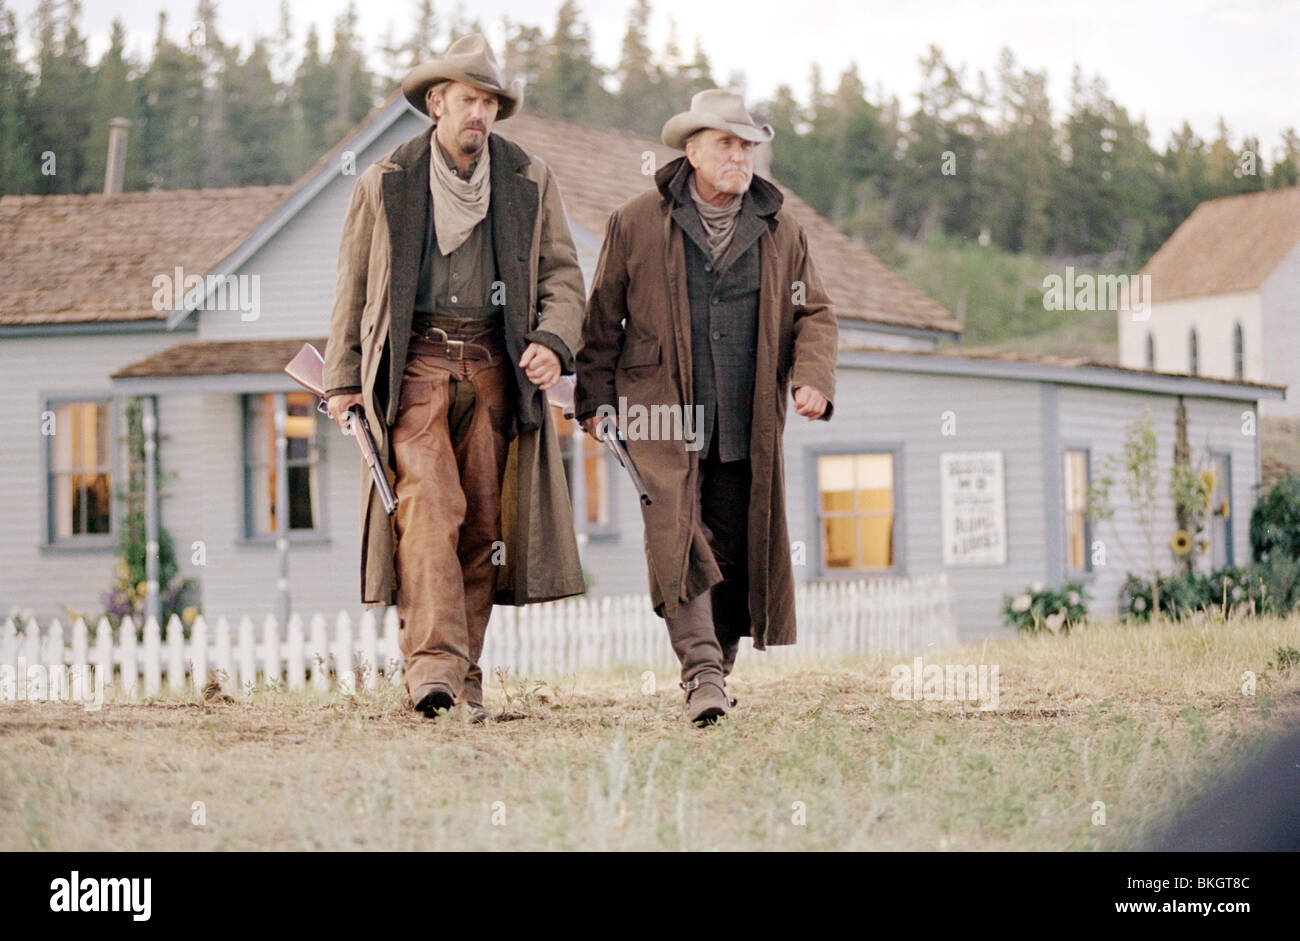 OPEN RANGE - Robert Duvall & Kevin Costner on location in Canada - Directed  by Kevin Costner - Warner Bros.